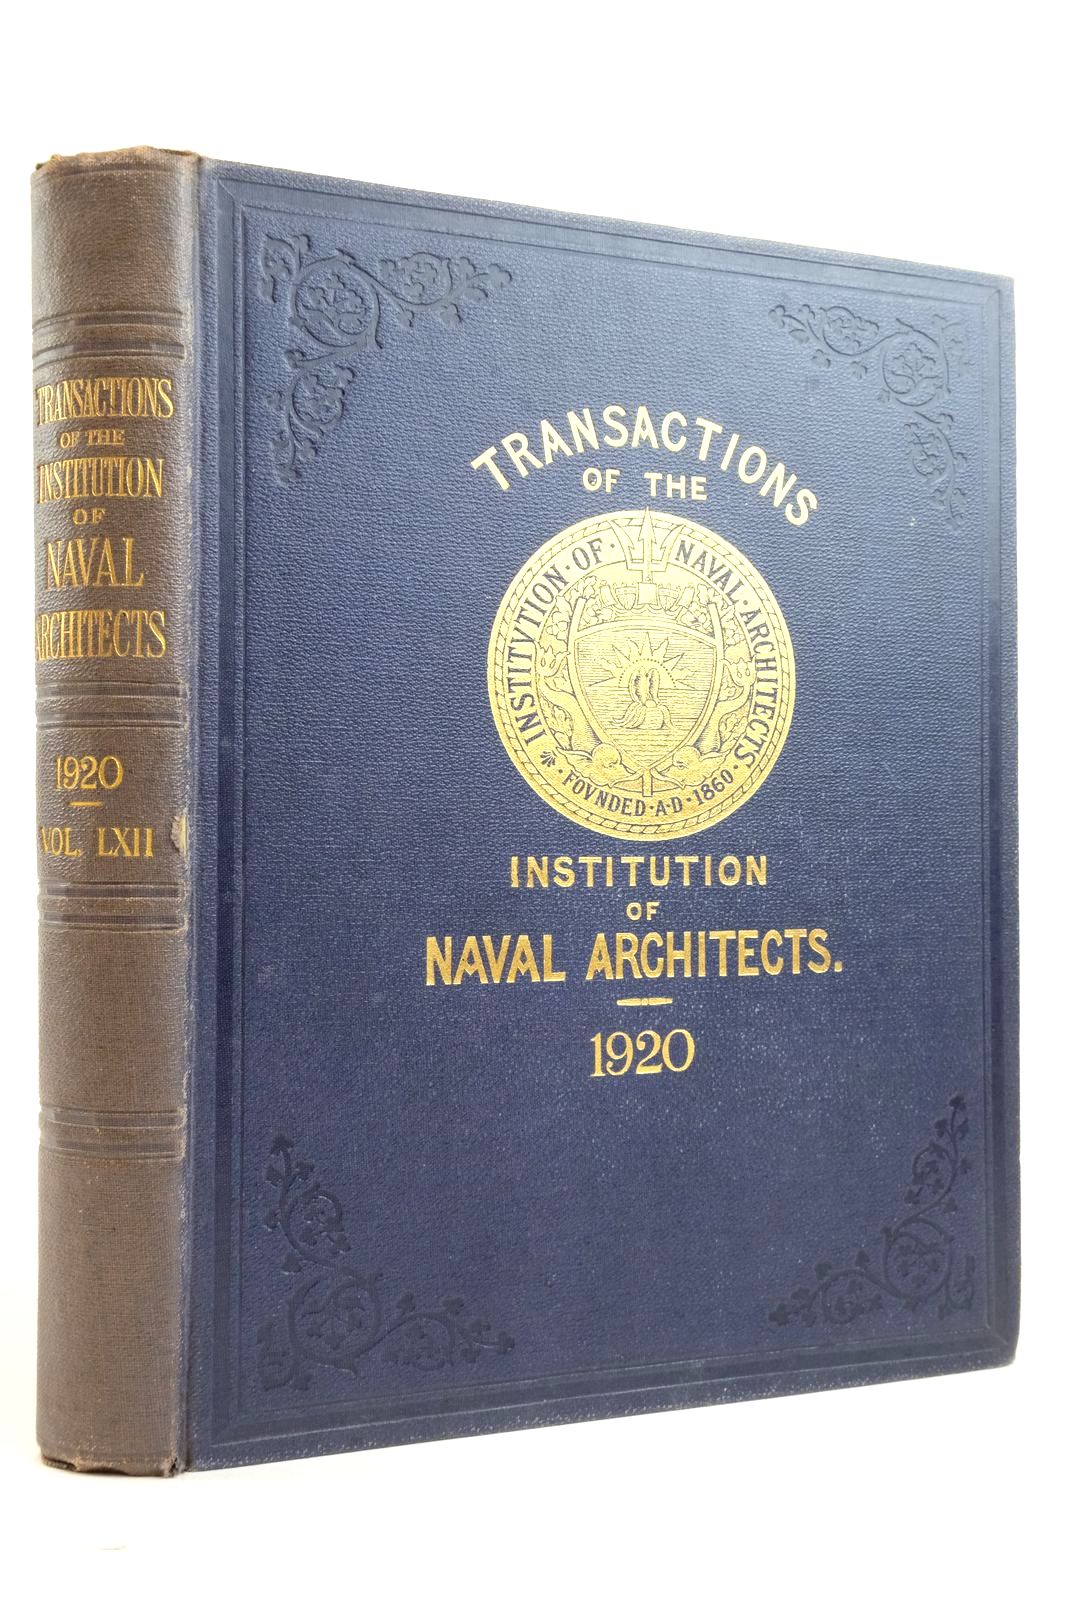 Photo of TRANSACTIONS OF THE INSTITUTION OF NAVAL ARCHITECTS VOLUME LXII- Stock Number: 2136444